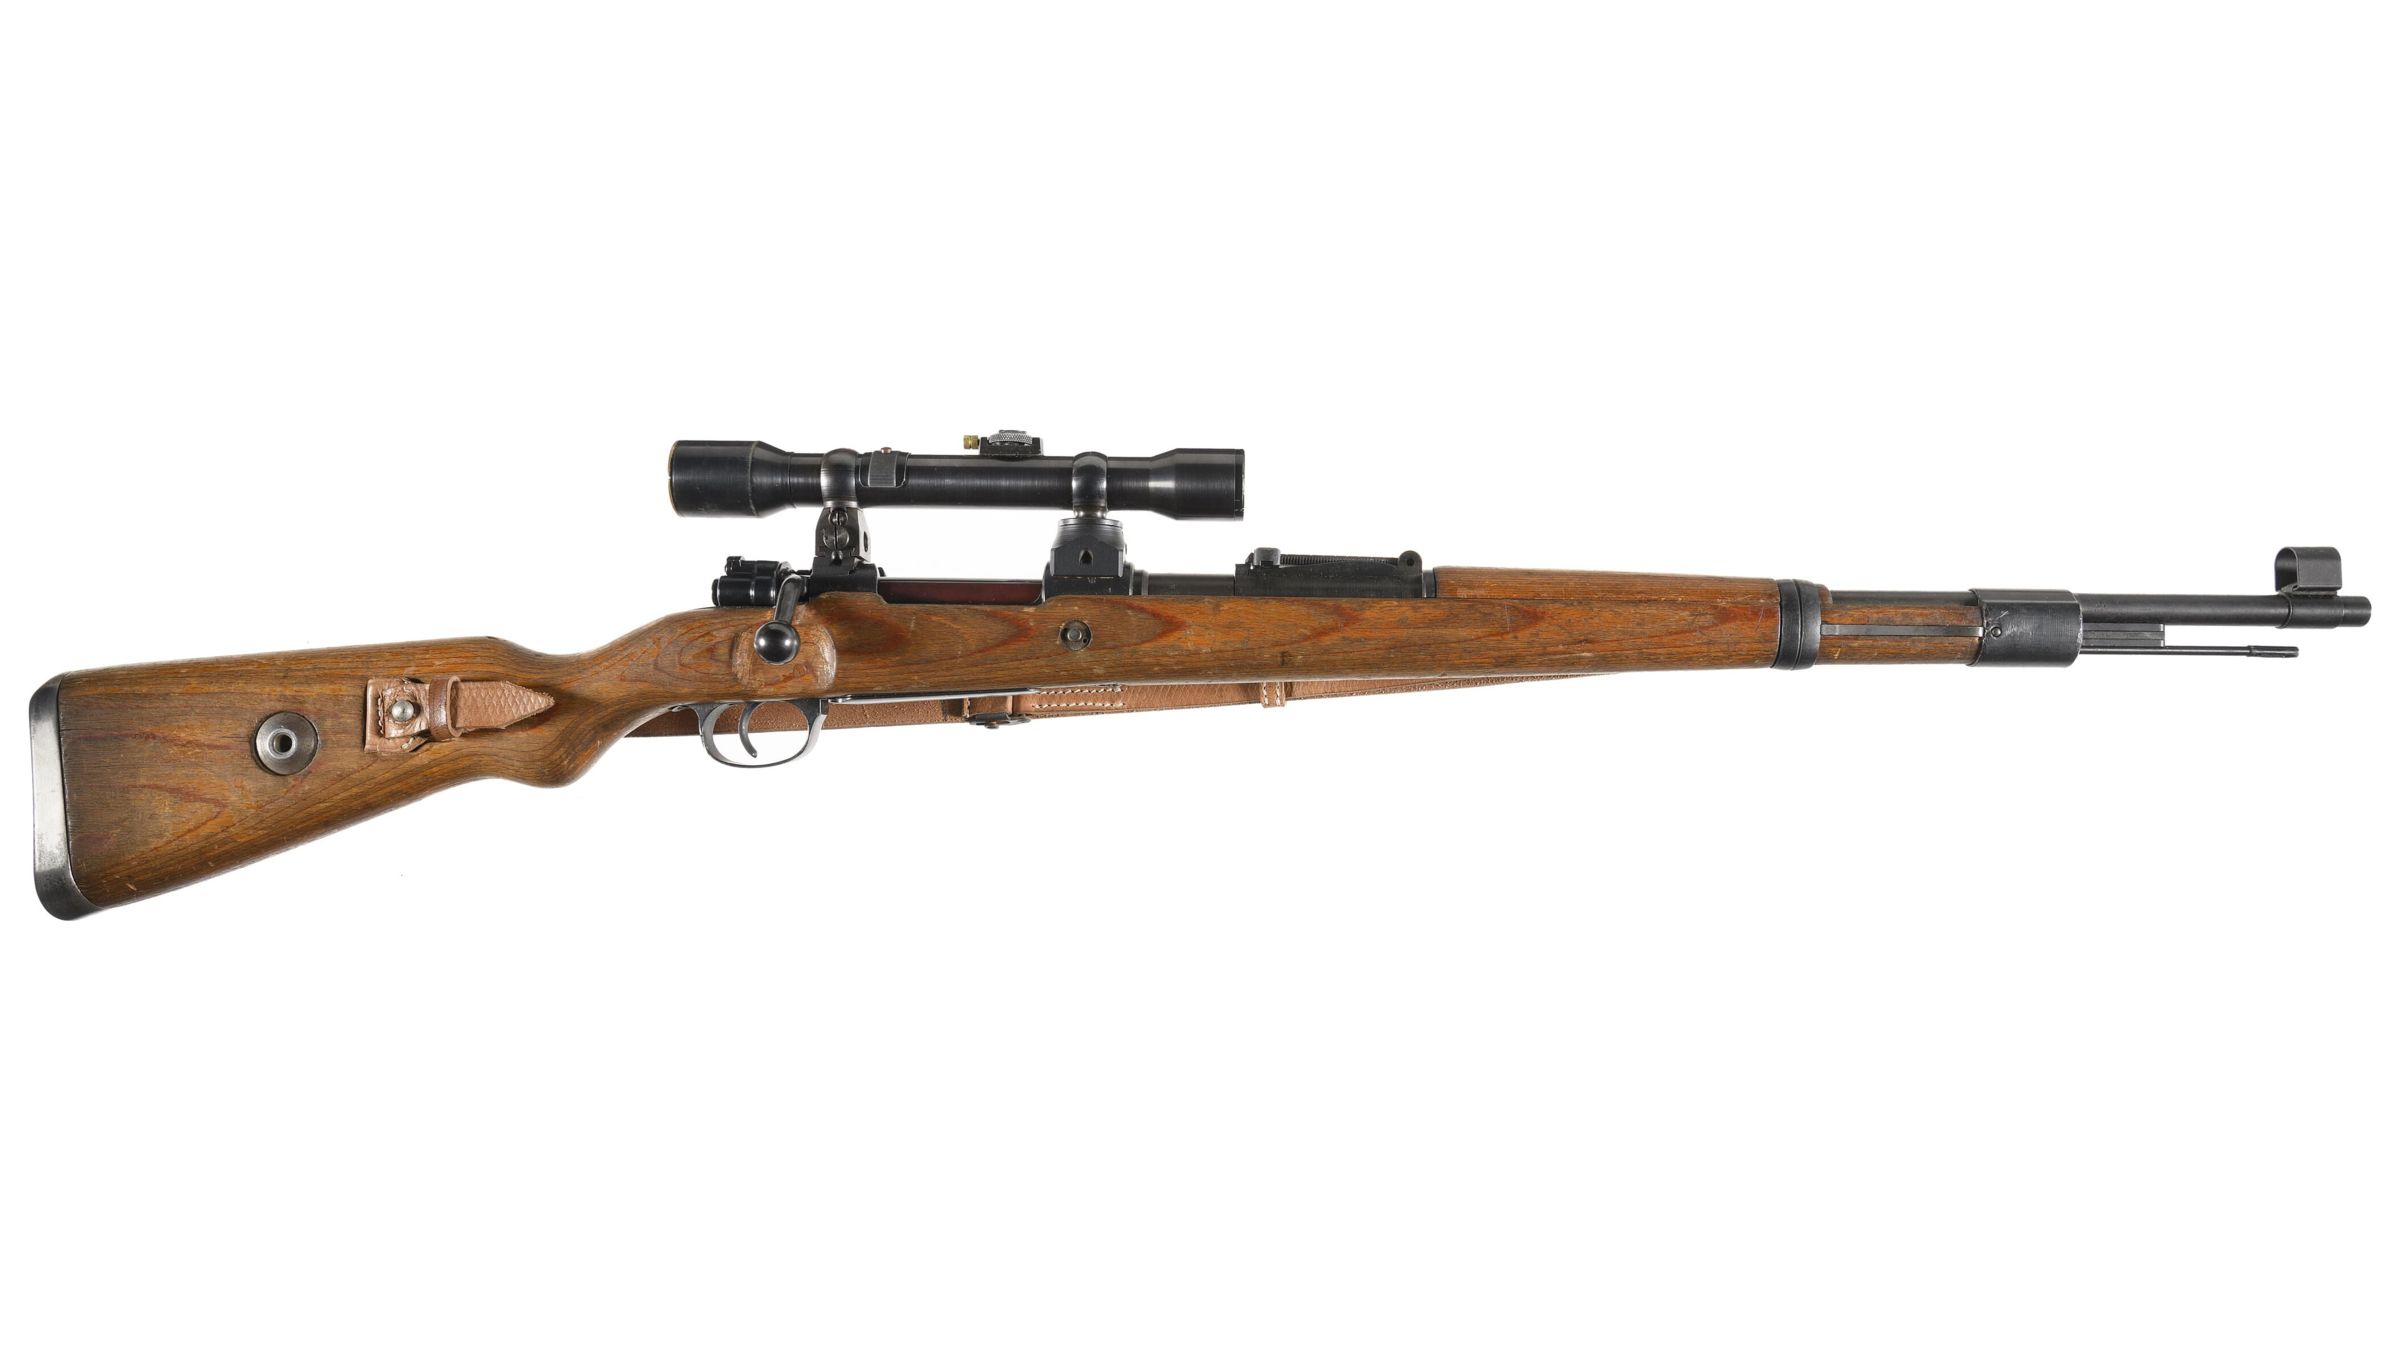 Mauser Model 98 Turret Style Sniper Rifle with Scope | Rock Island Auction